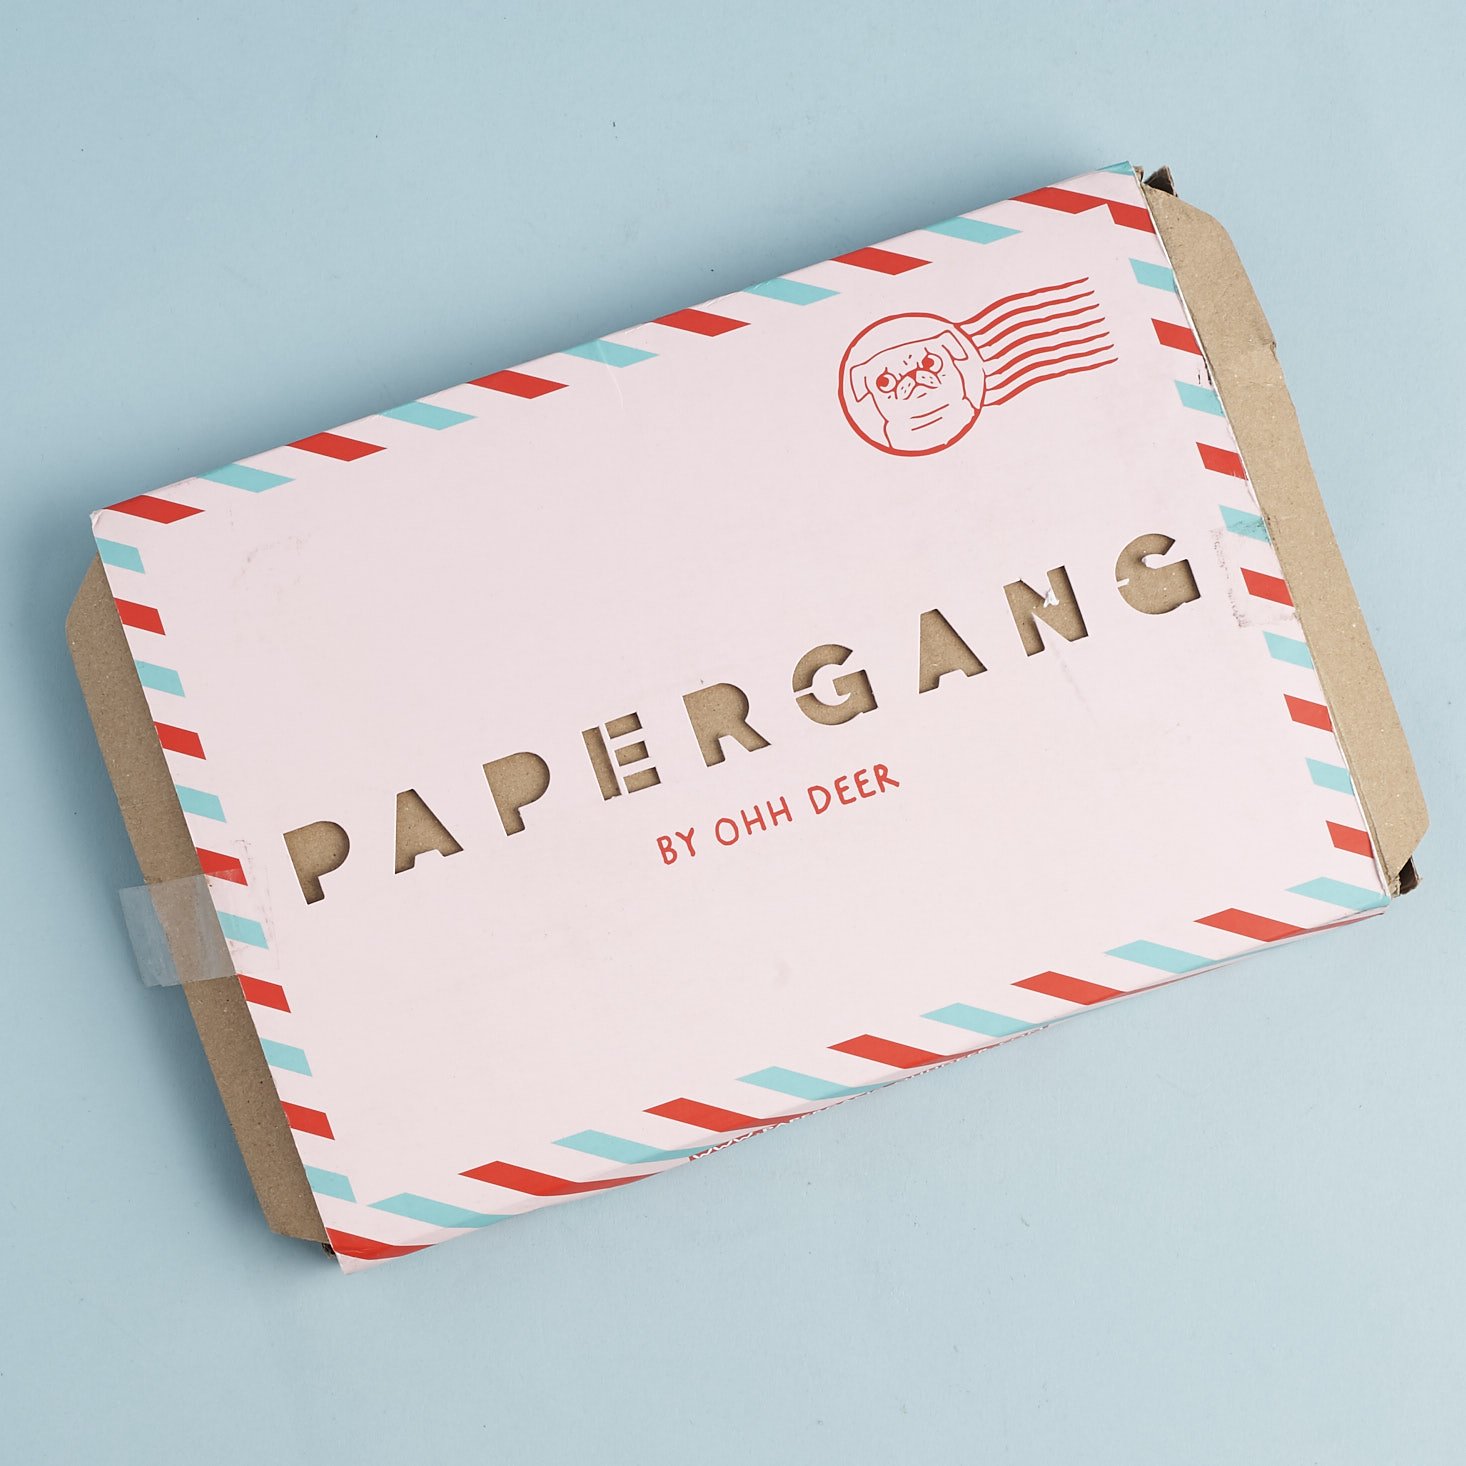 Papergang by Ohh Deer Stationery Subscription Box Review – August 2017